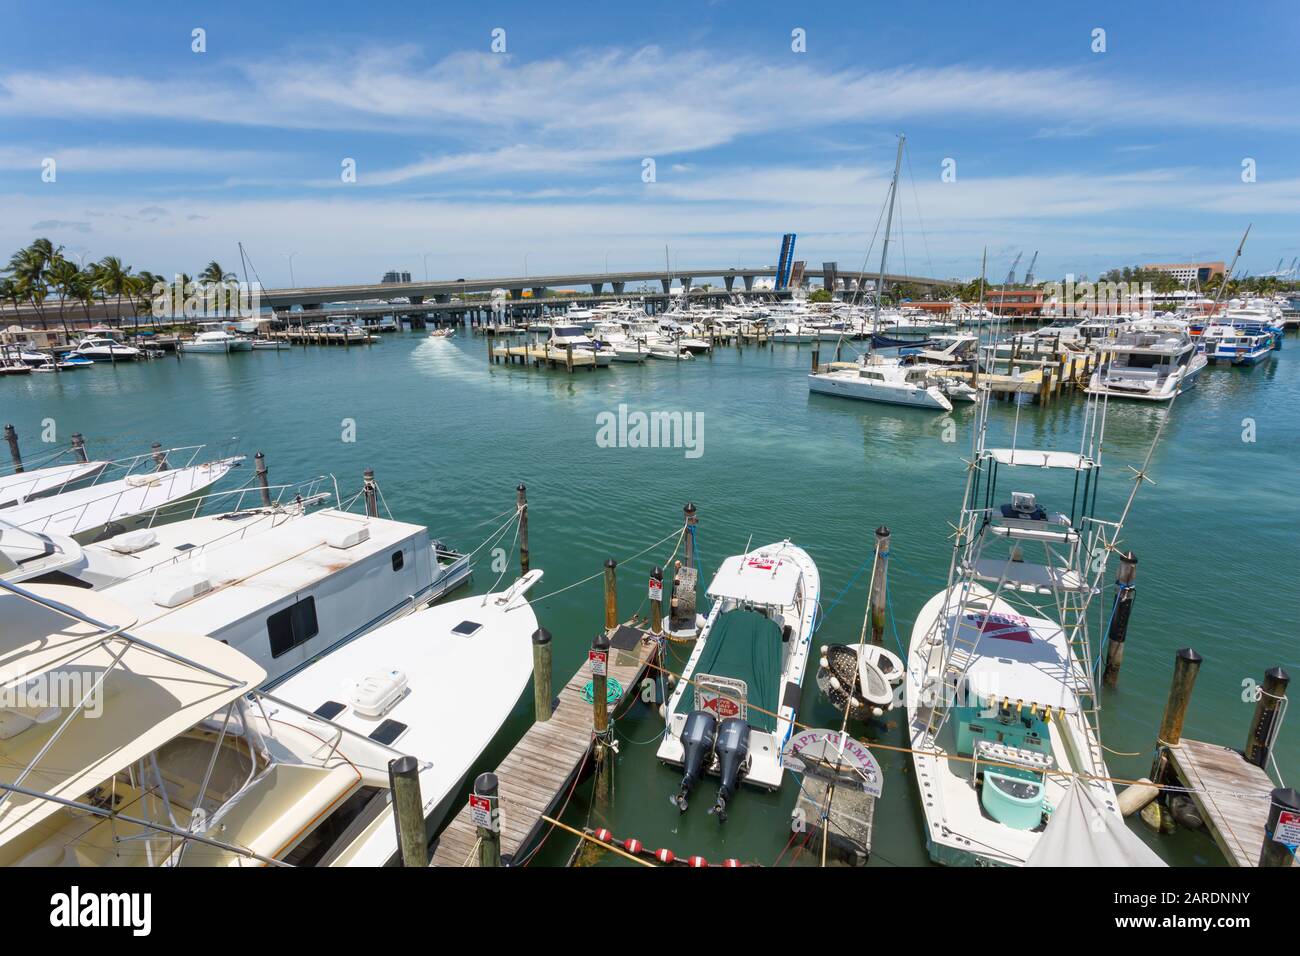 Harbour in the Bayside Marketplace in Downtown, Miami, Florida, United States of America, North America Stock Photo